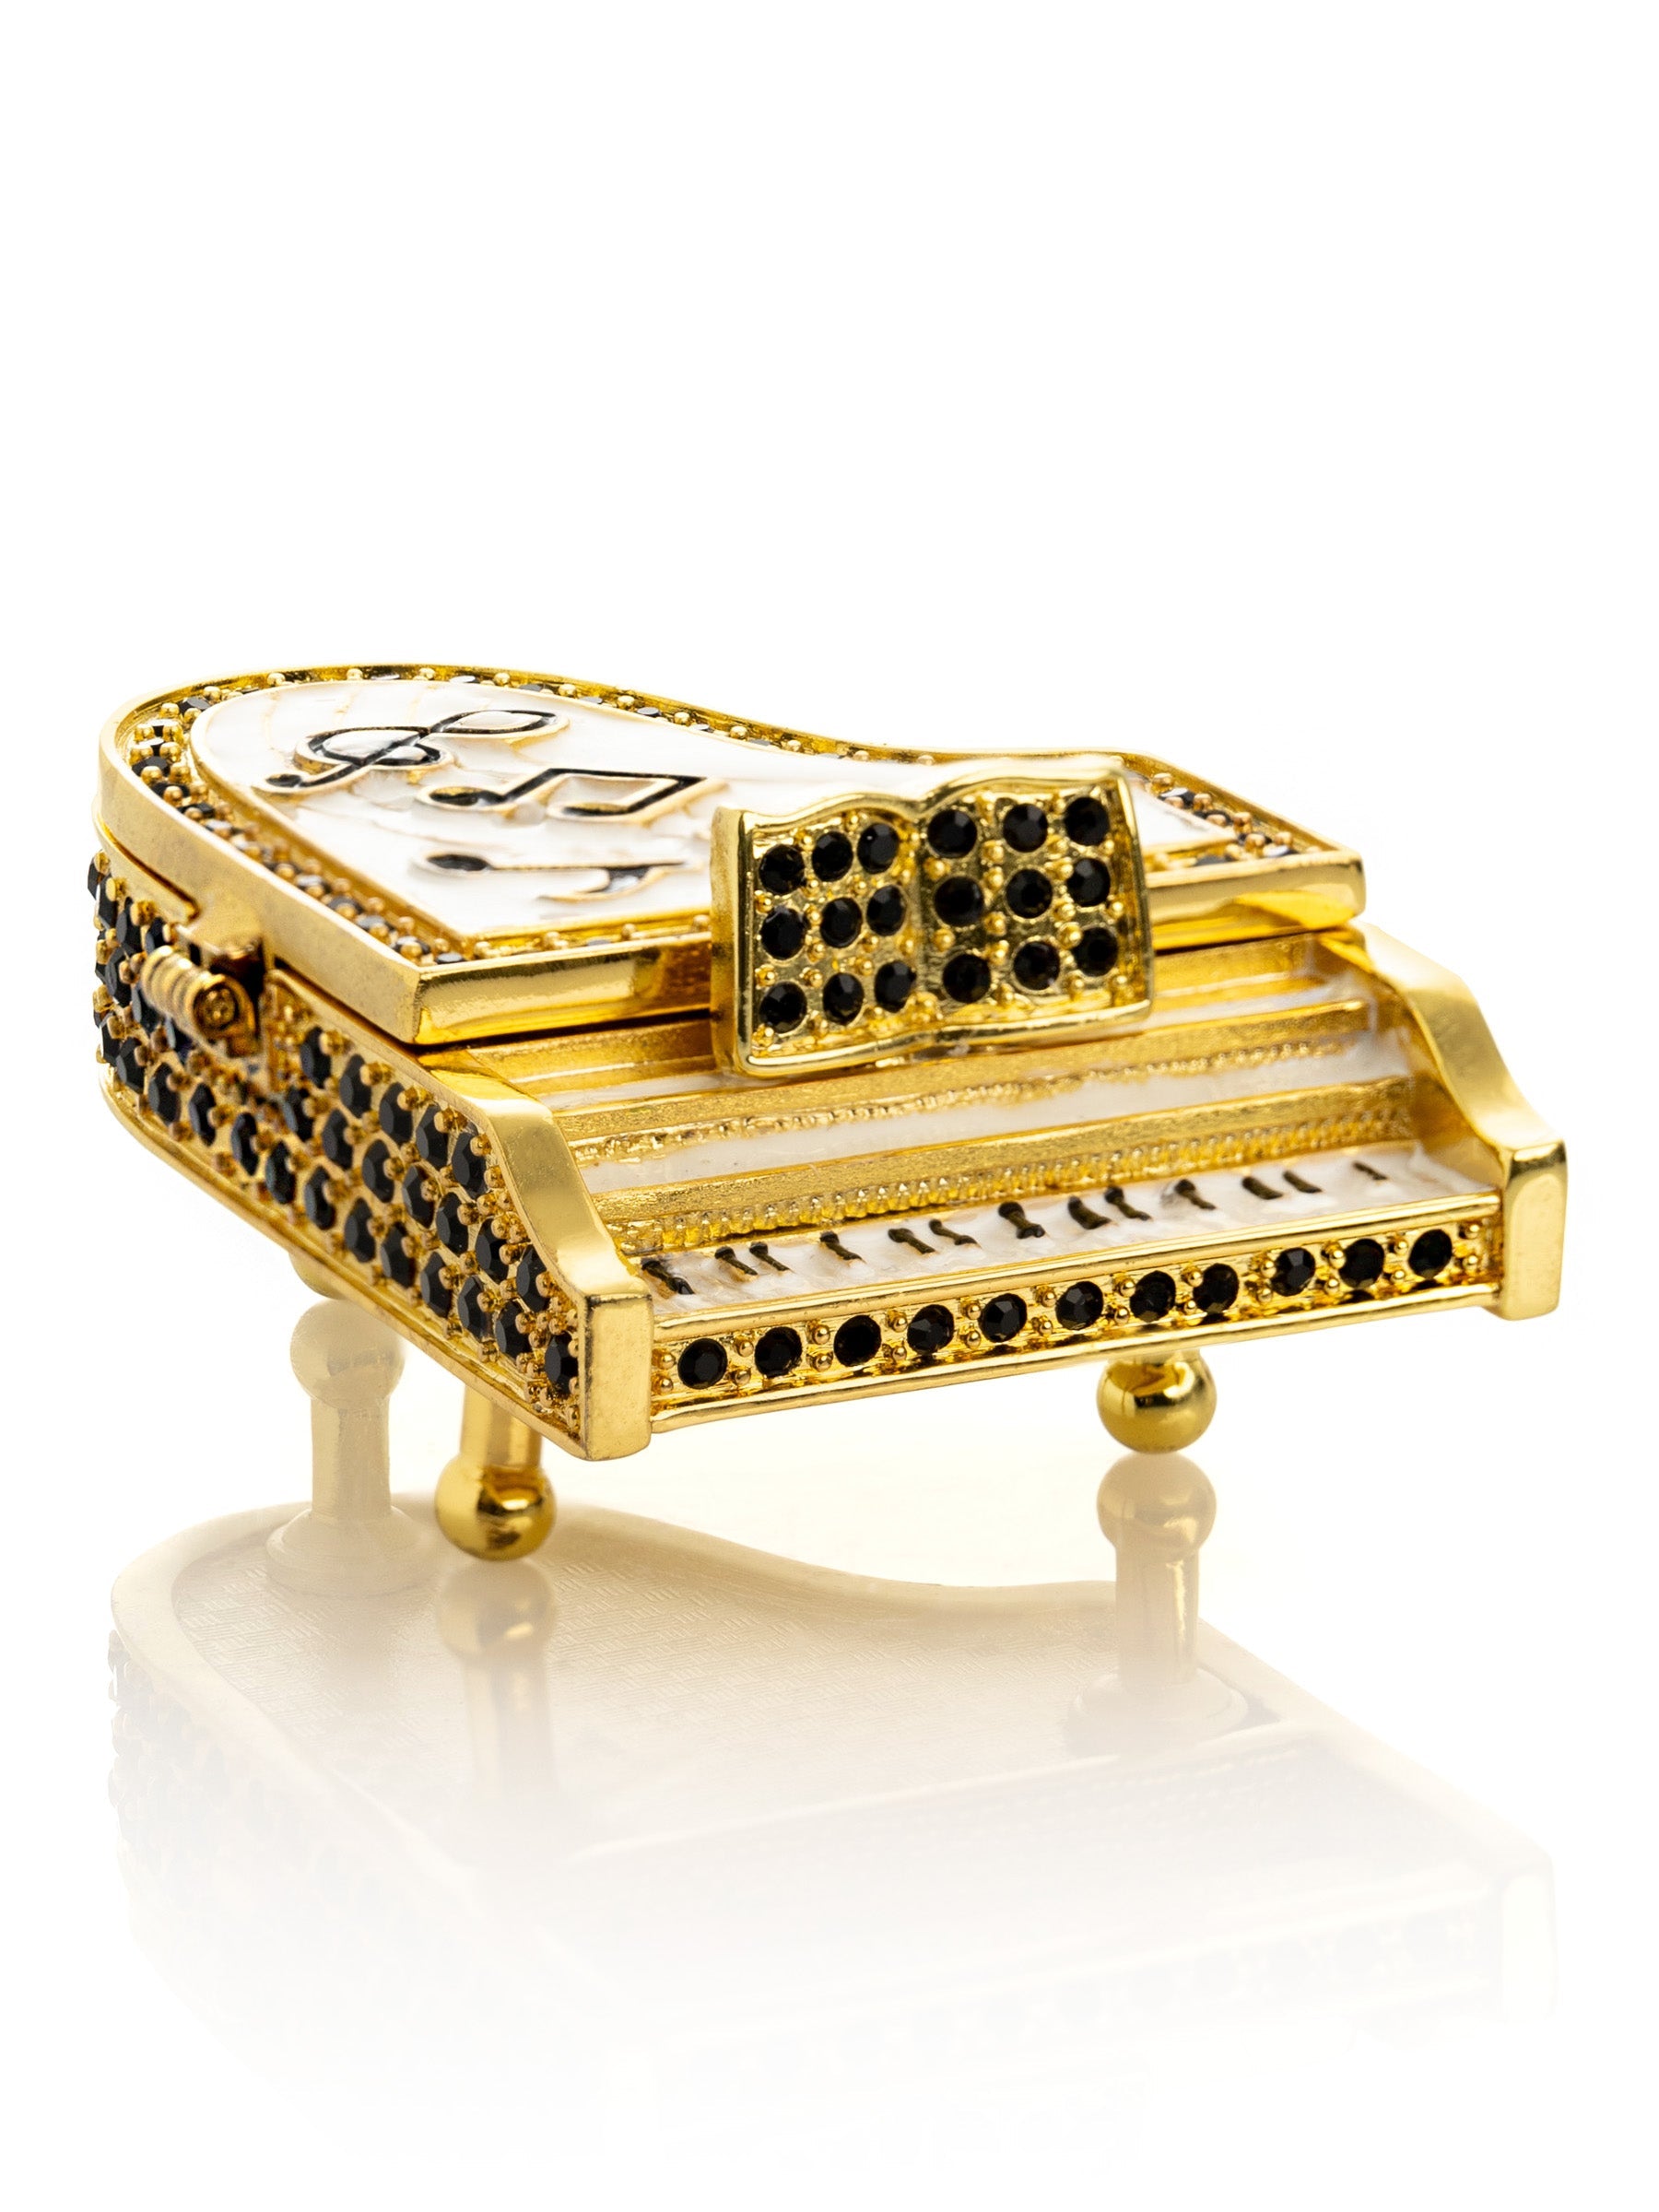 Golden White Piano with Black Crystals-3